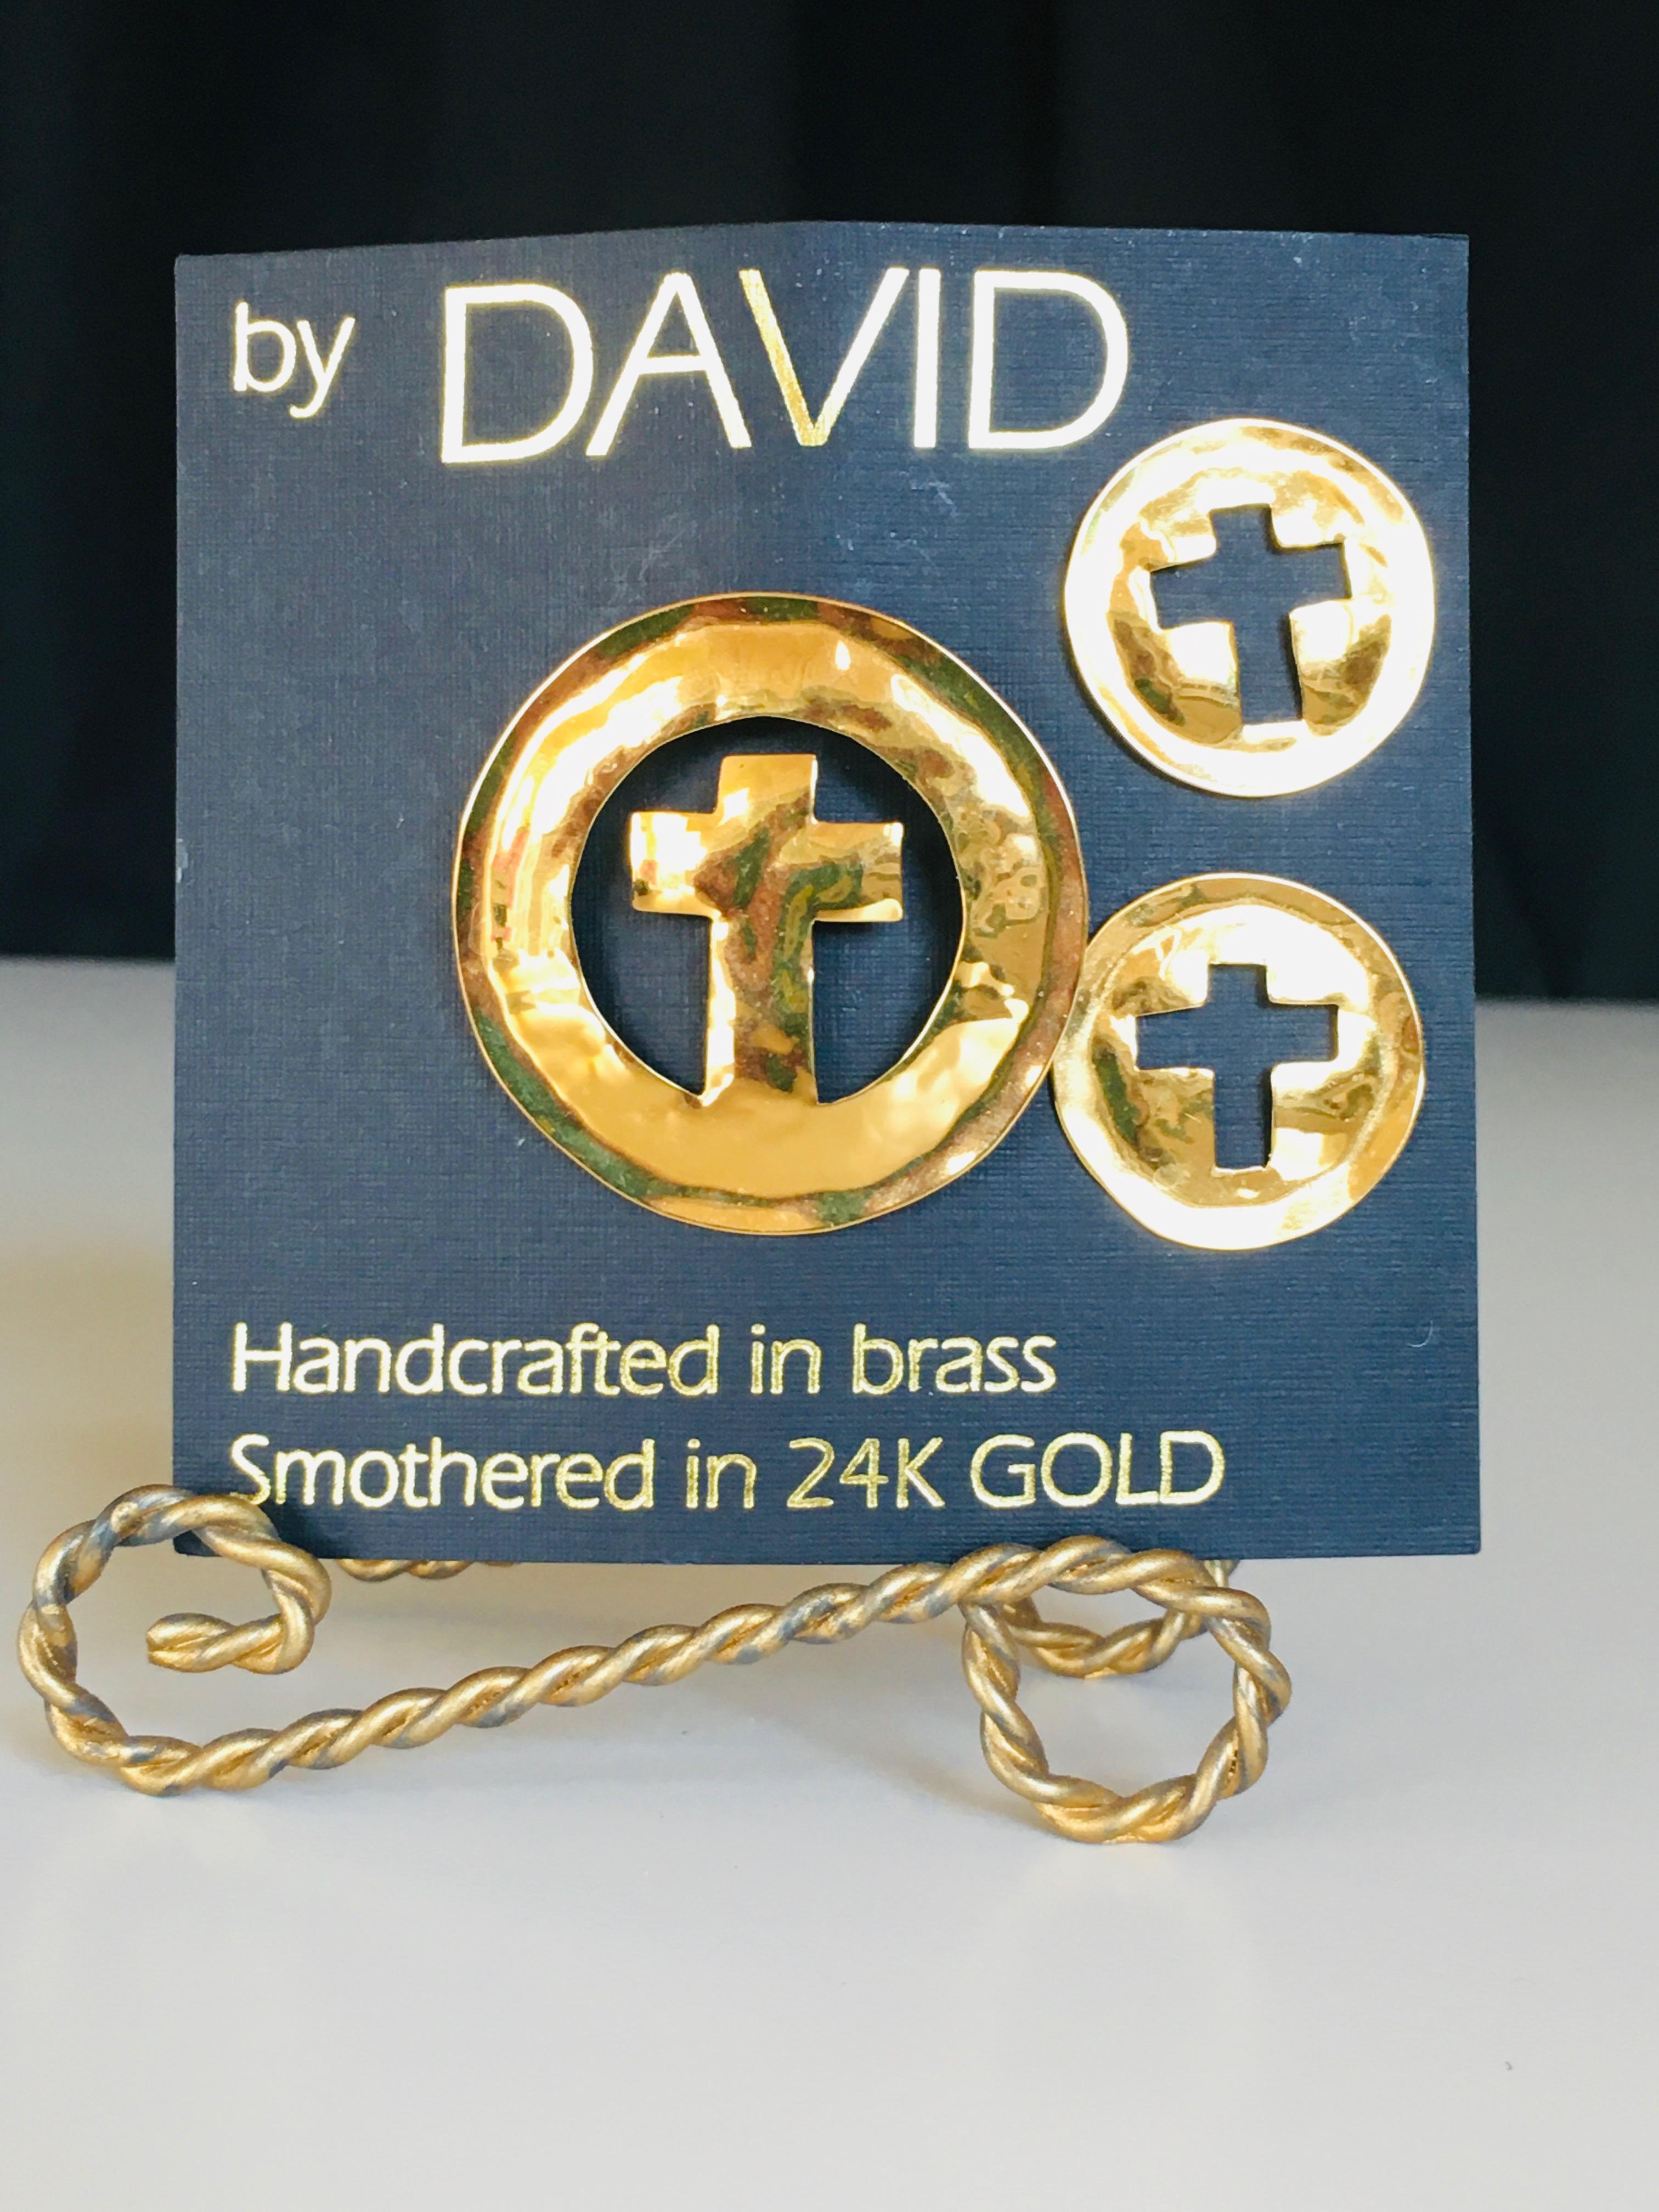 24 KT Gold Smothered over Brass Handcrafted by DAVID